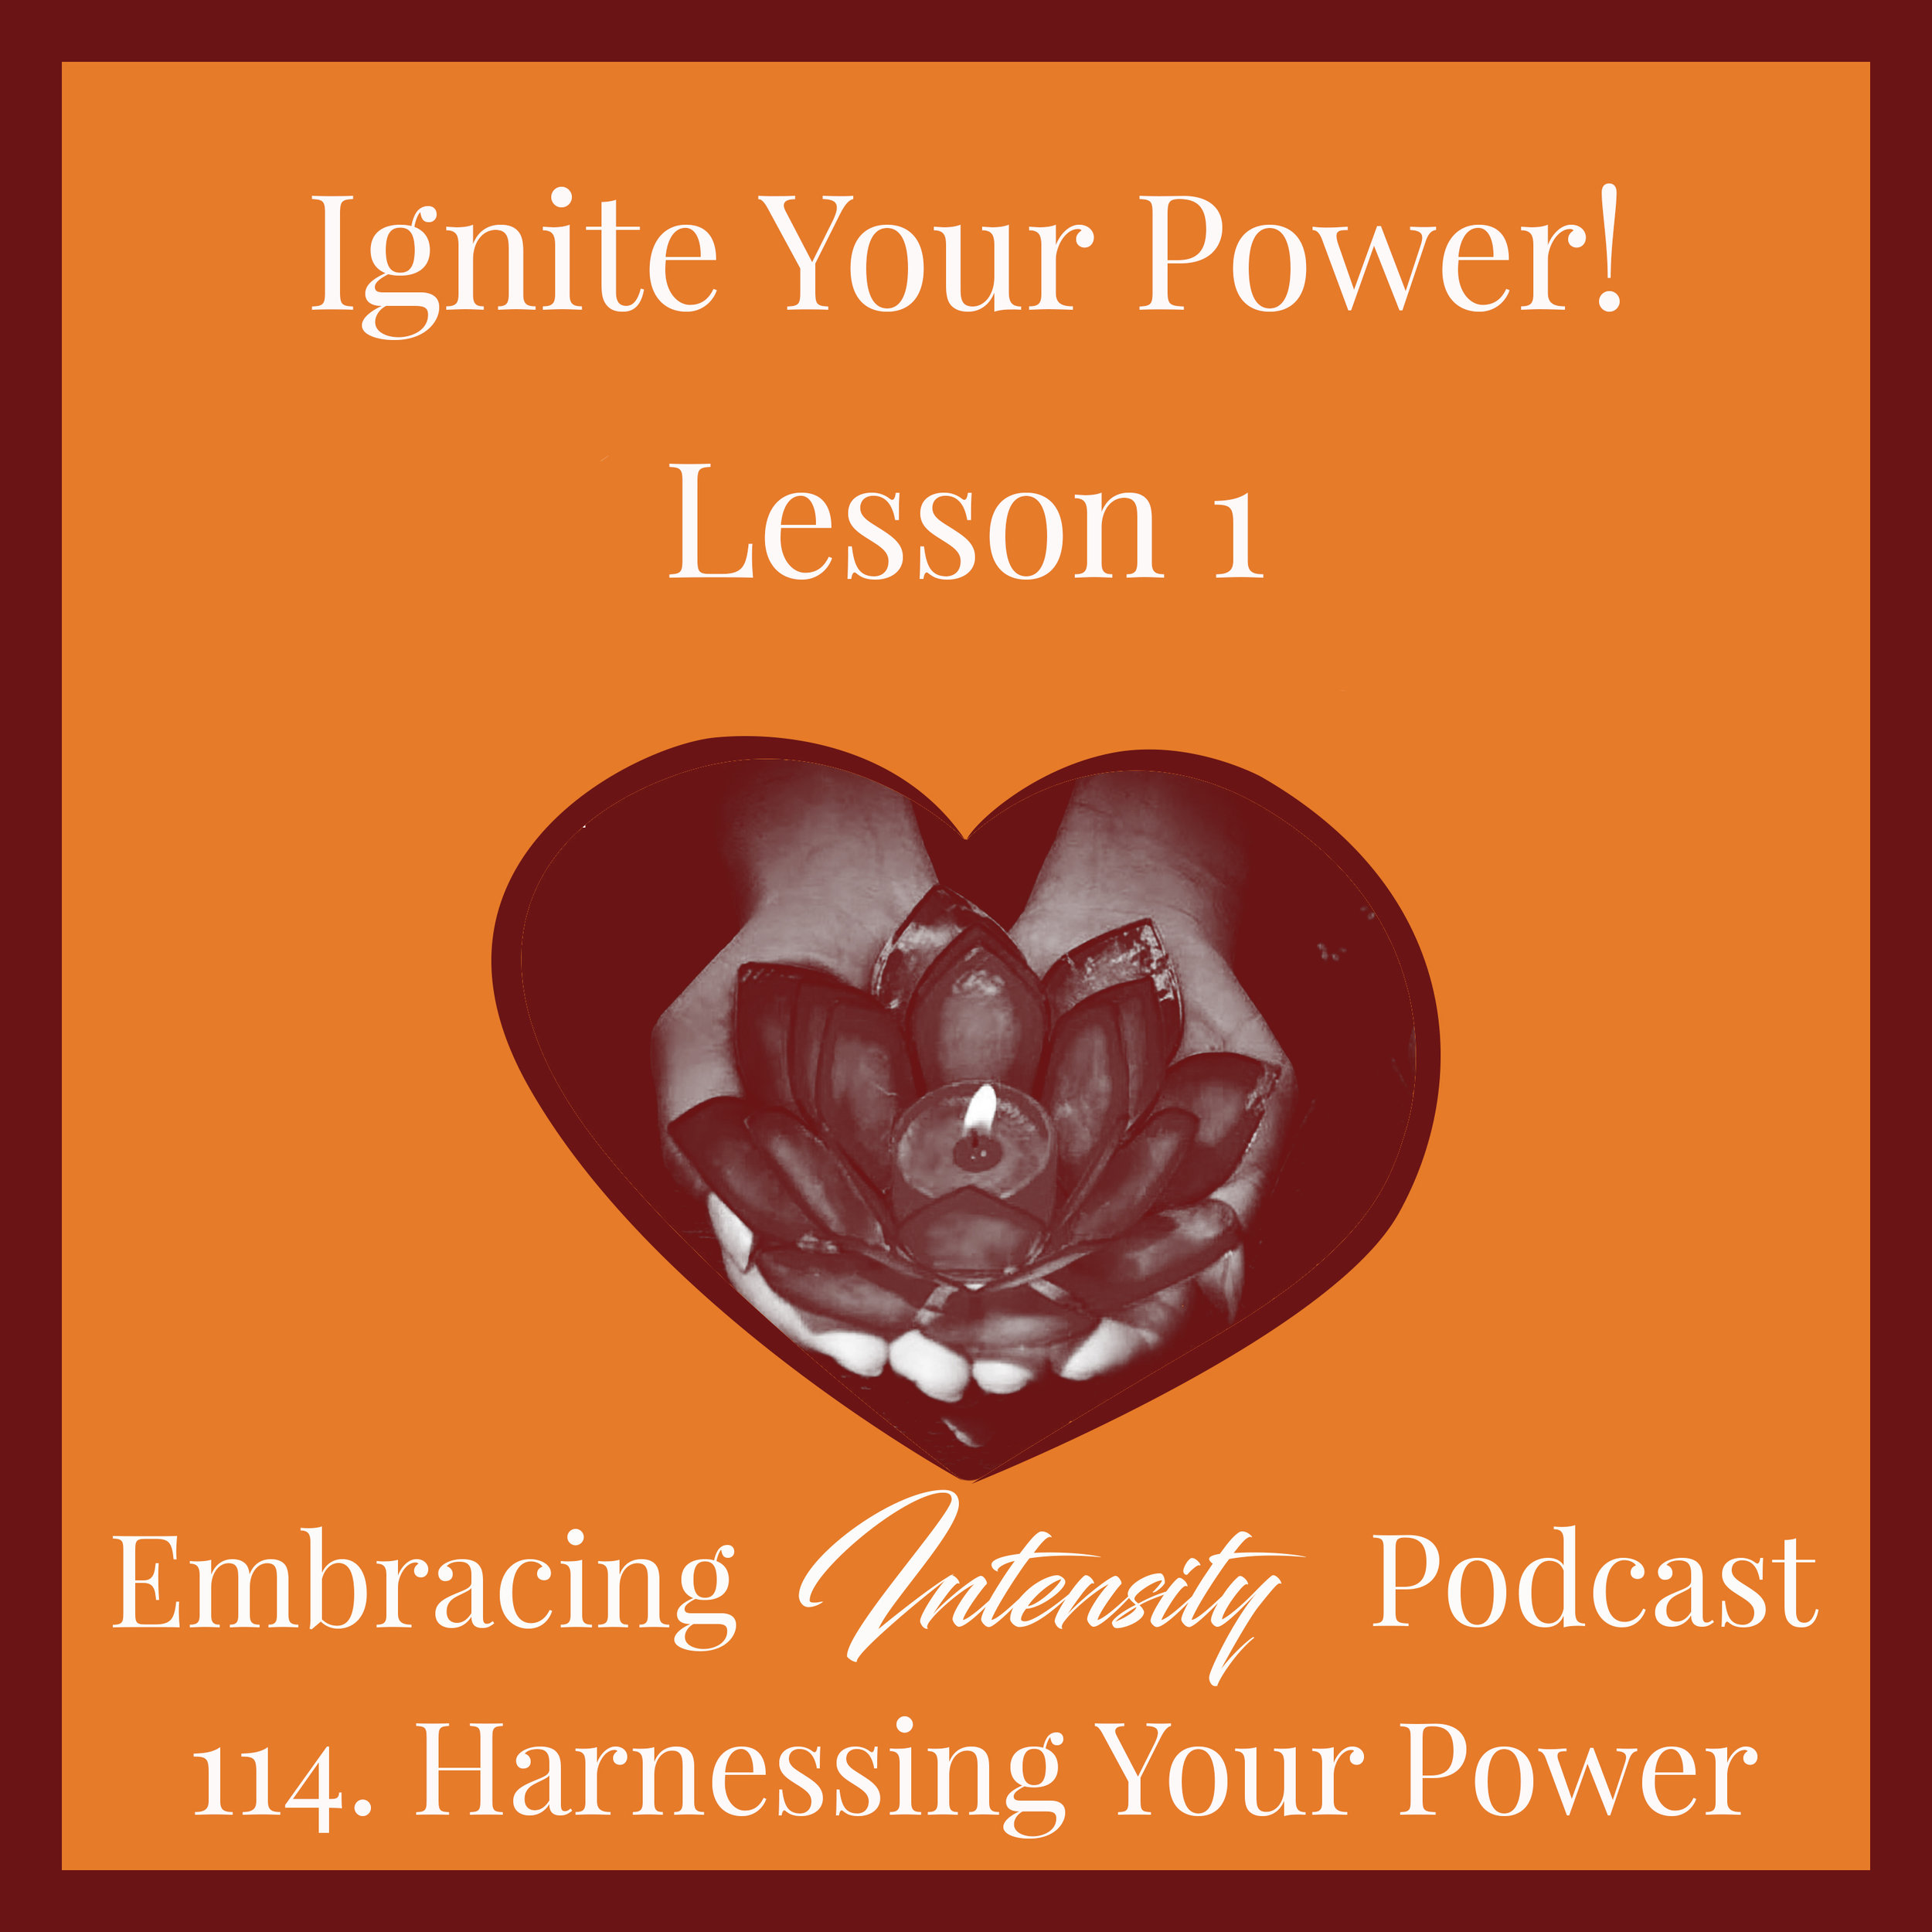 Harnessing Your Power!